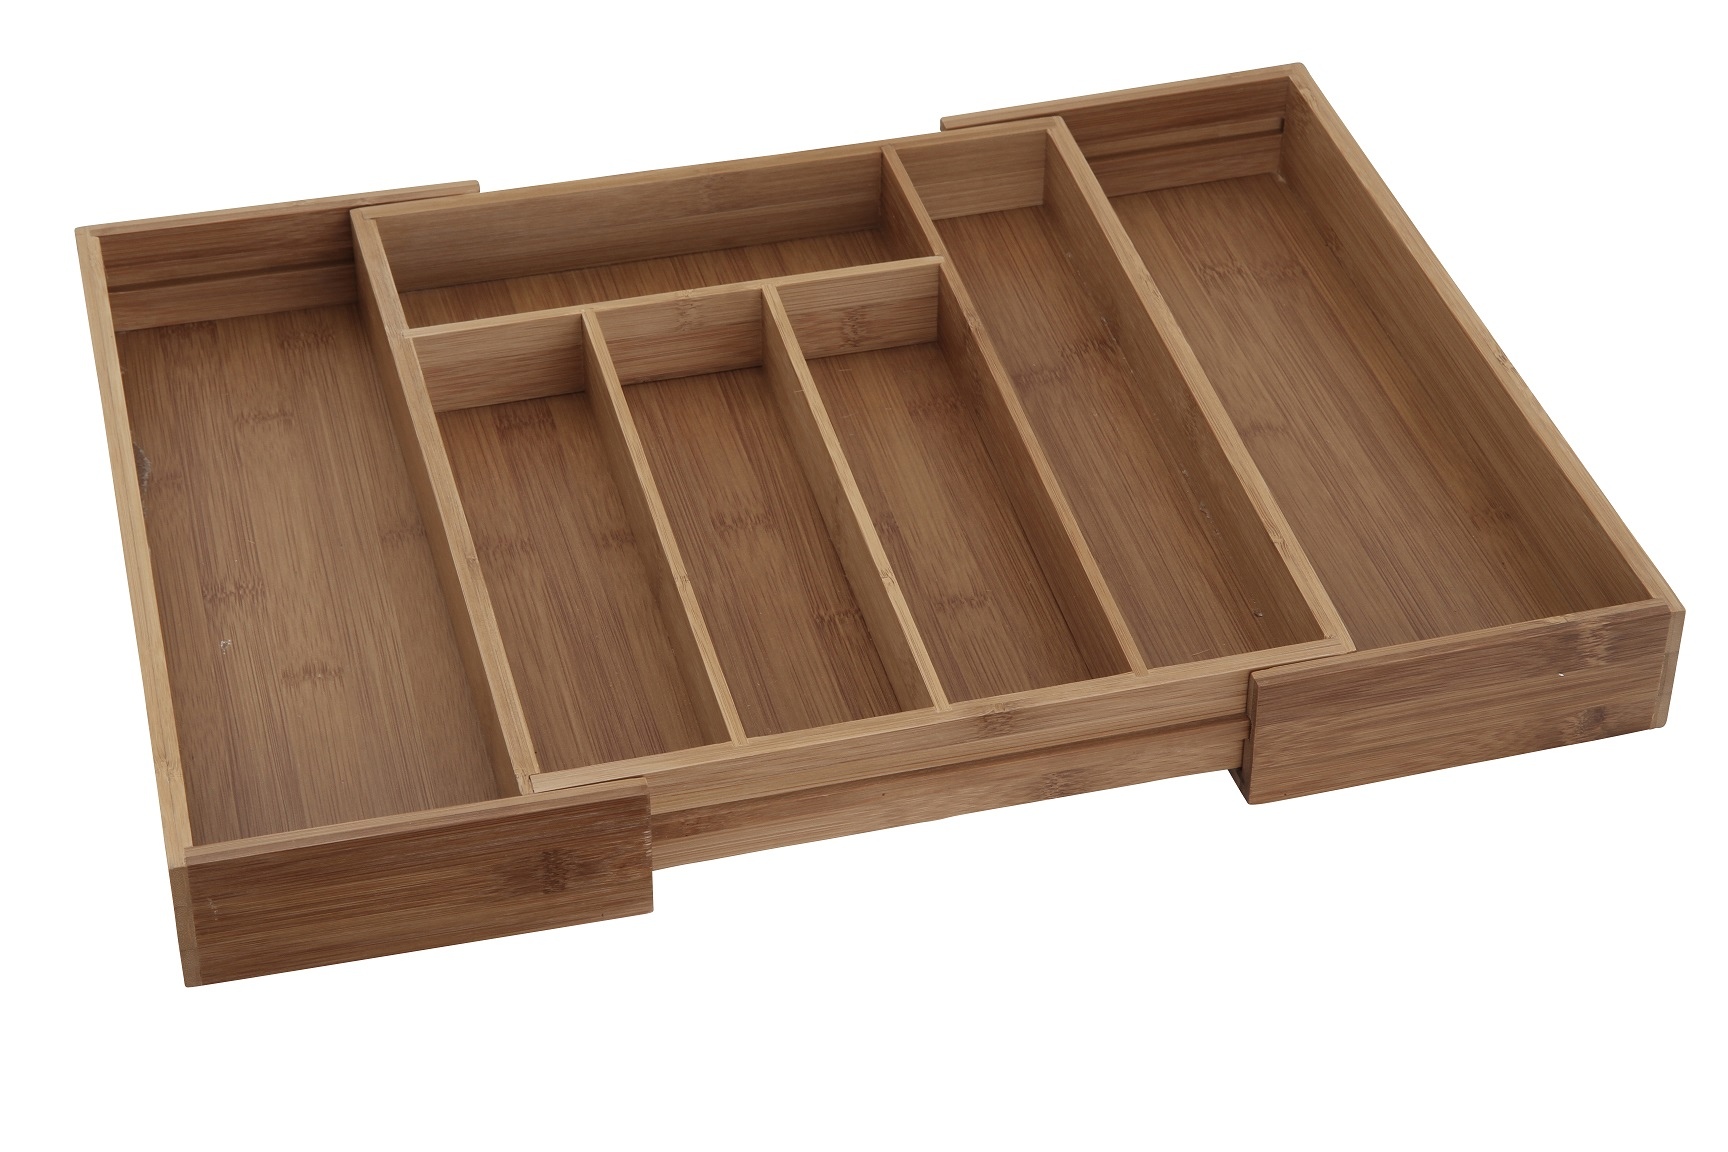 https://www.easygiftproducts.co.uk/7156/extendable-bamboo-cutlery-box.jpg